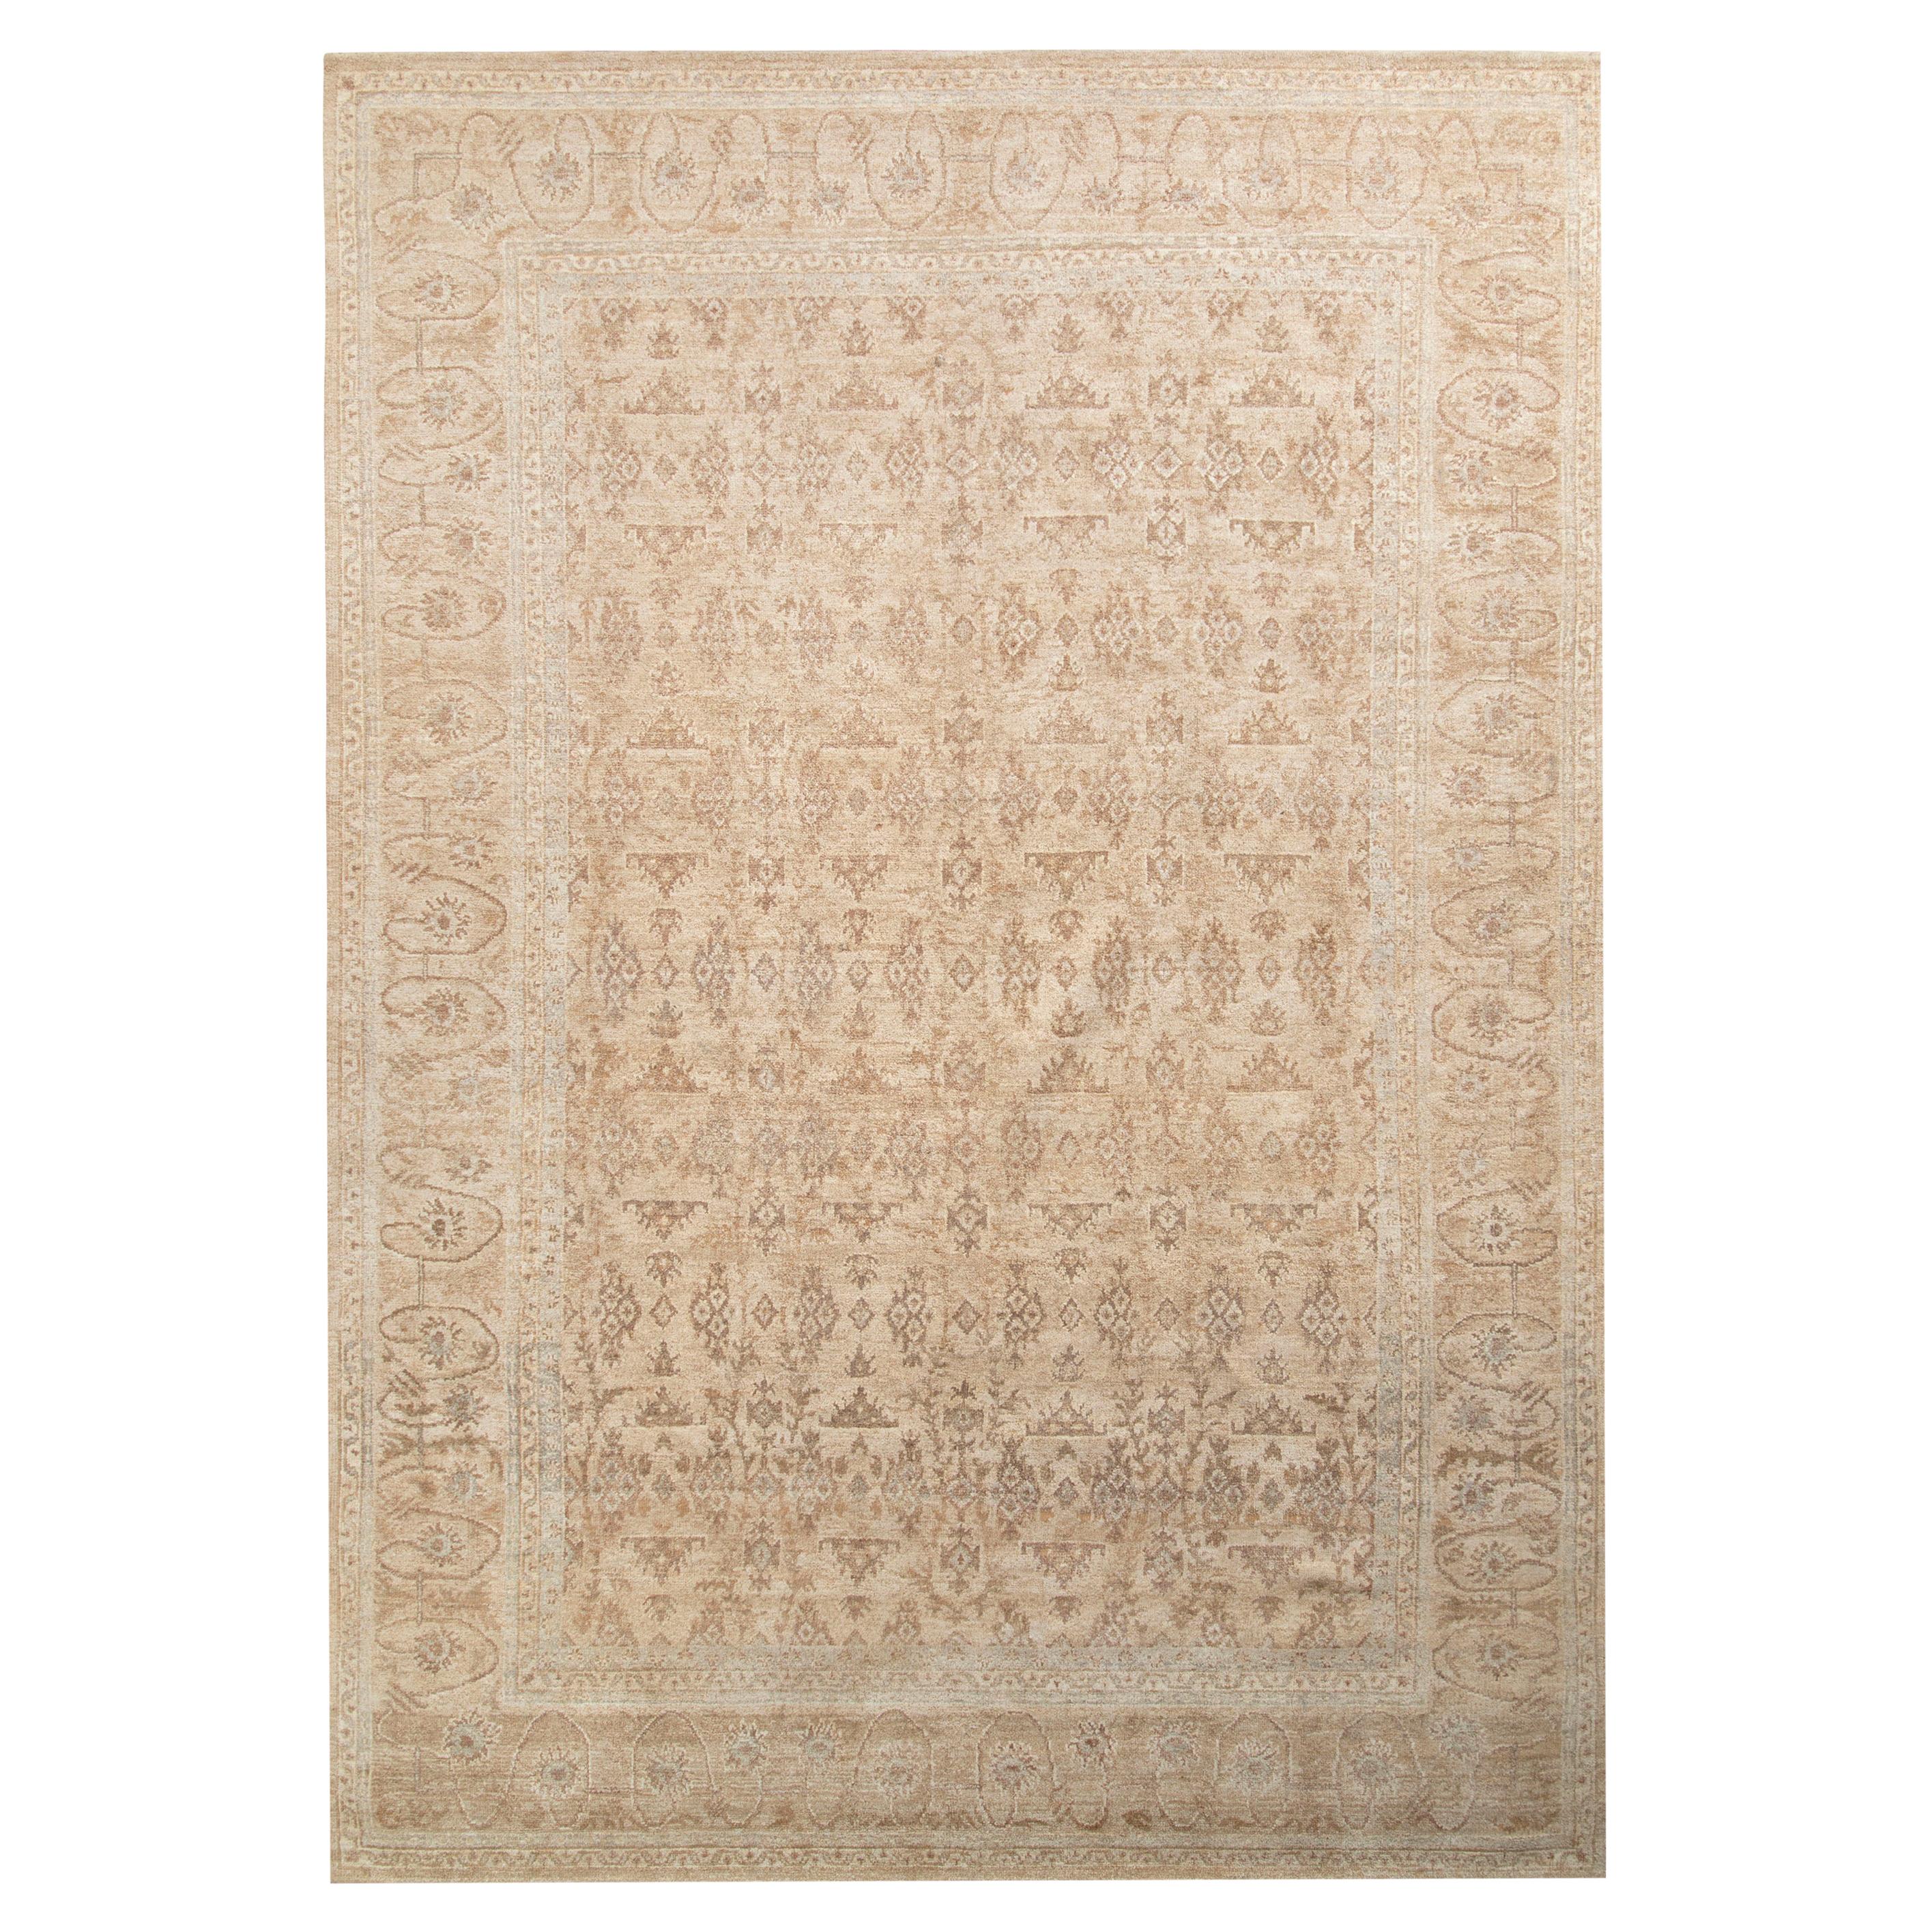 Rug & Kilim’s Transitional Style Rug in Beige-Brown All over Floral Pattern